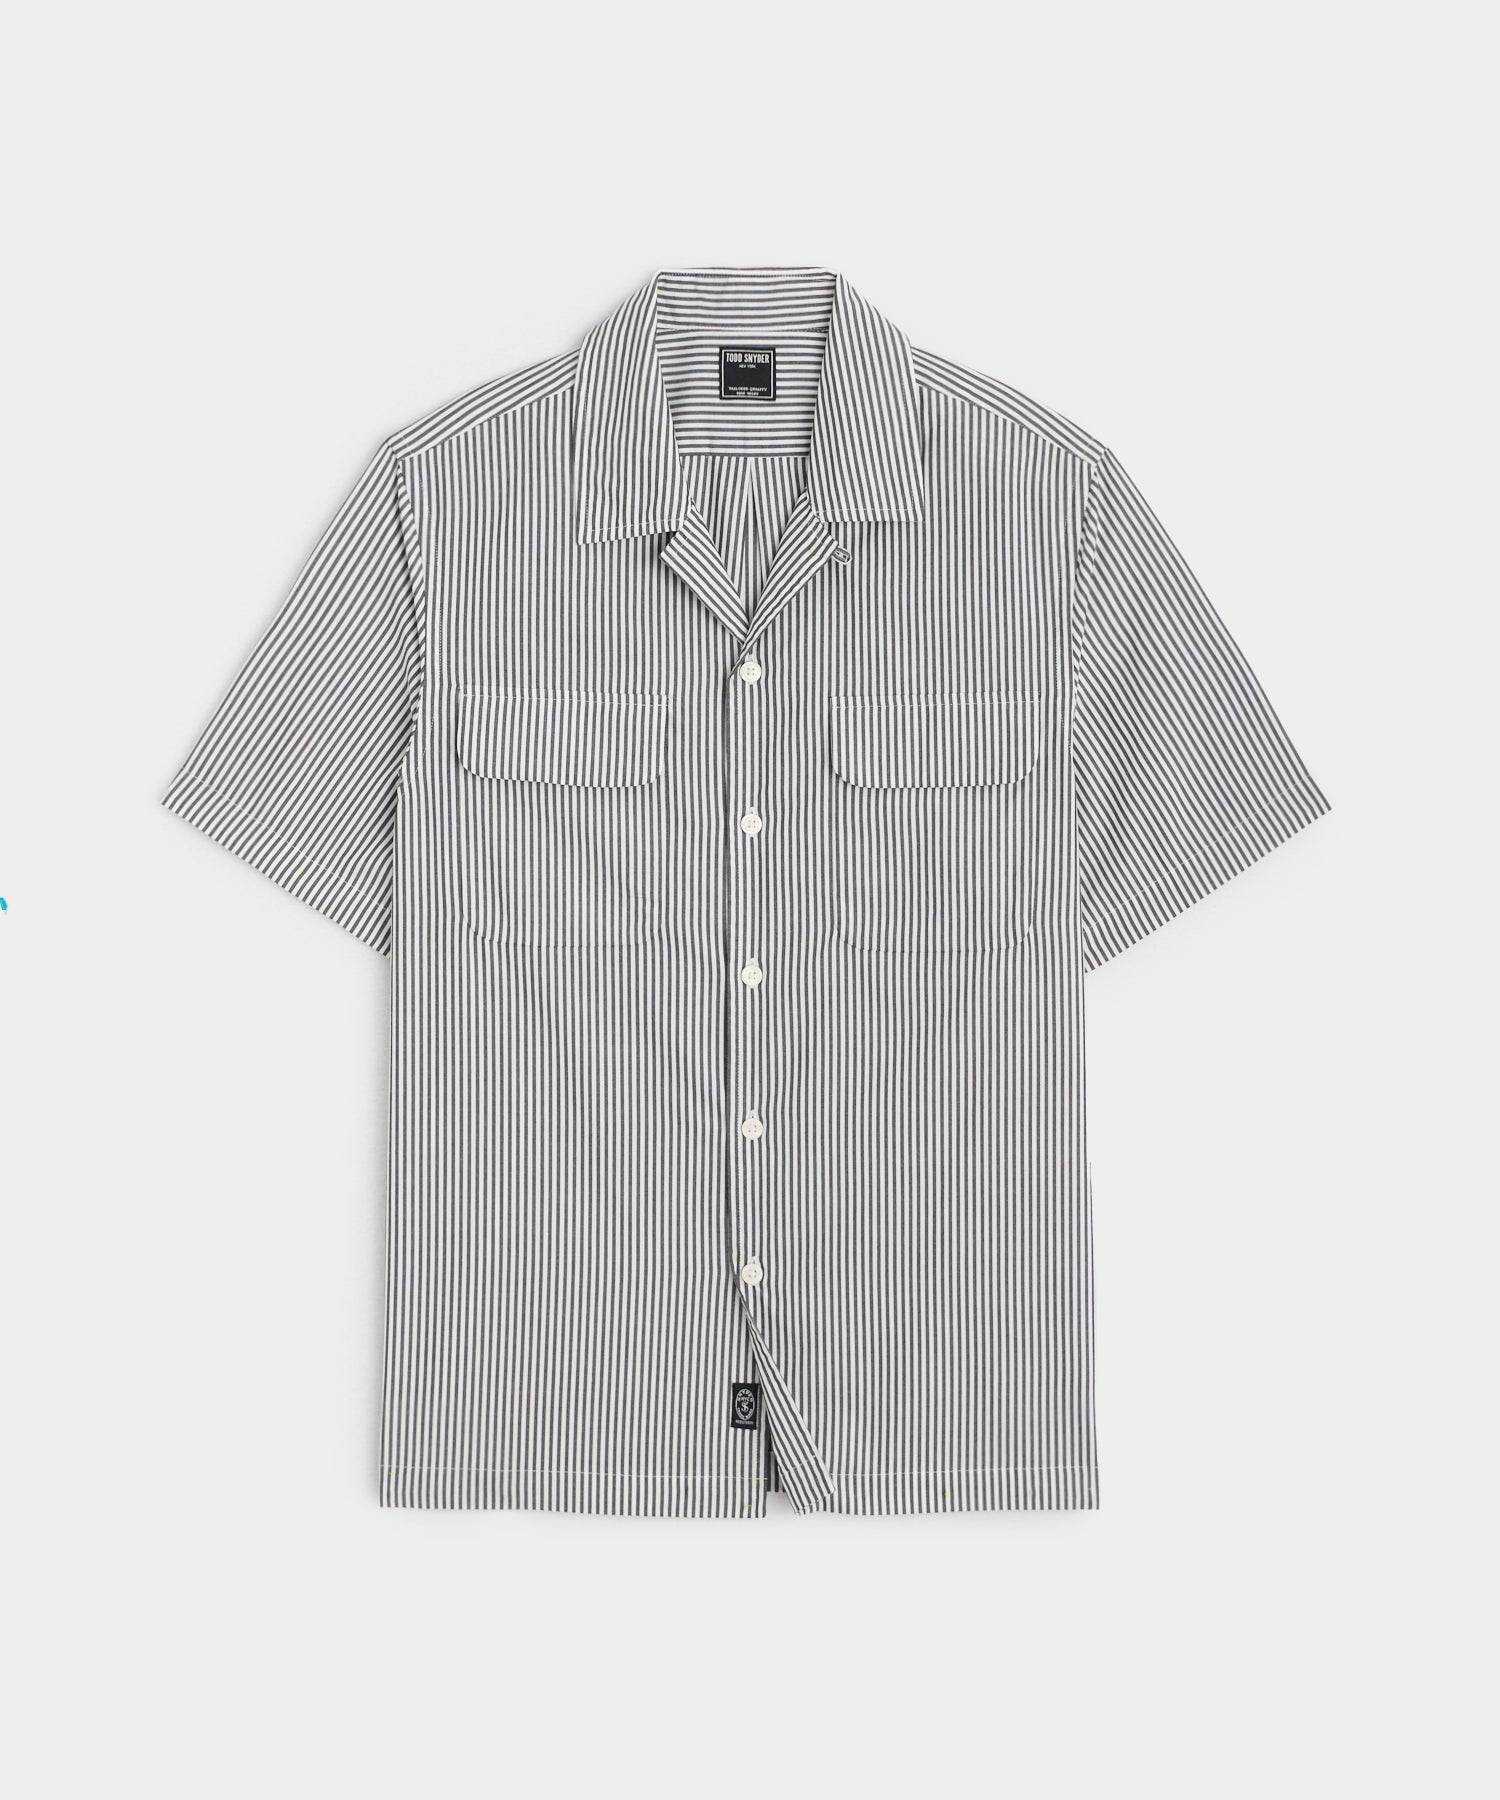 PINSTRIPE TWO POCKET SHORT SLEEVE SHIRT IN CHARCOAL